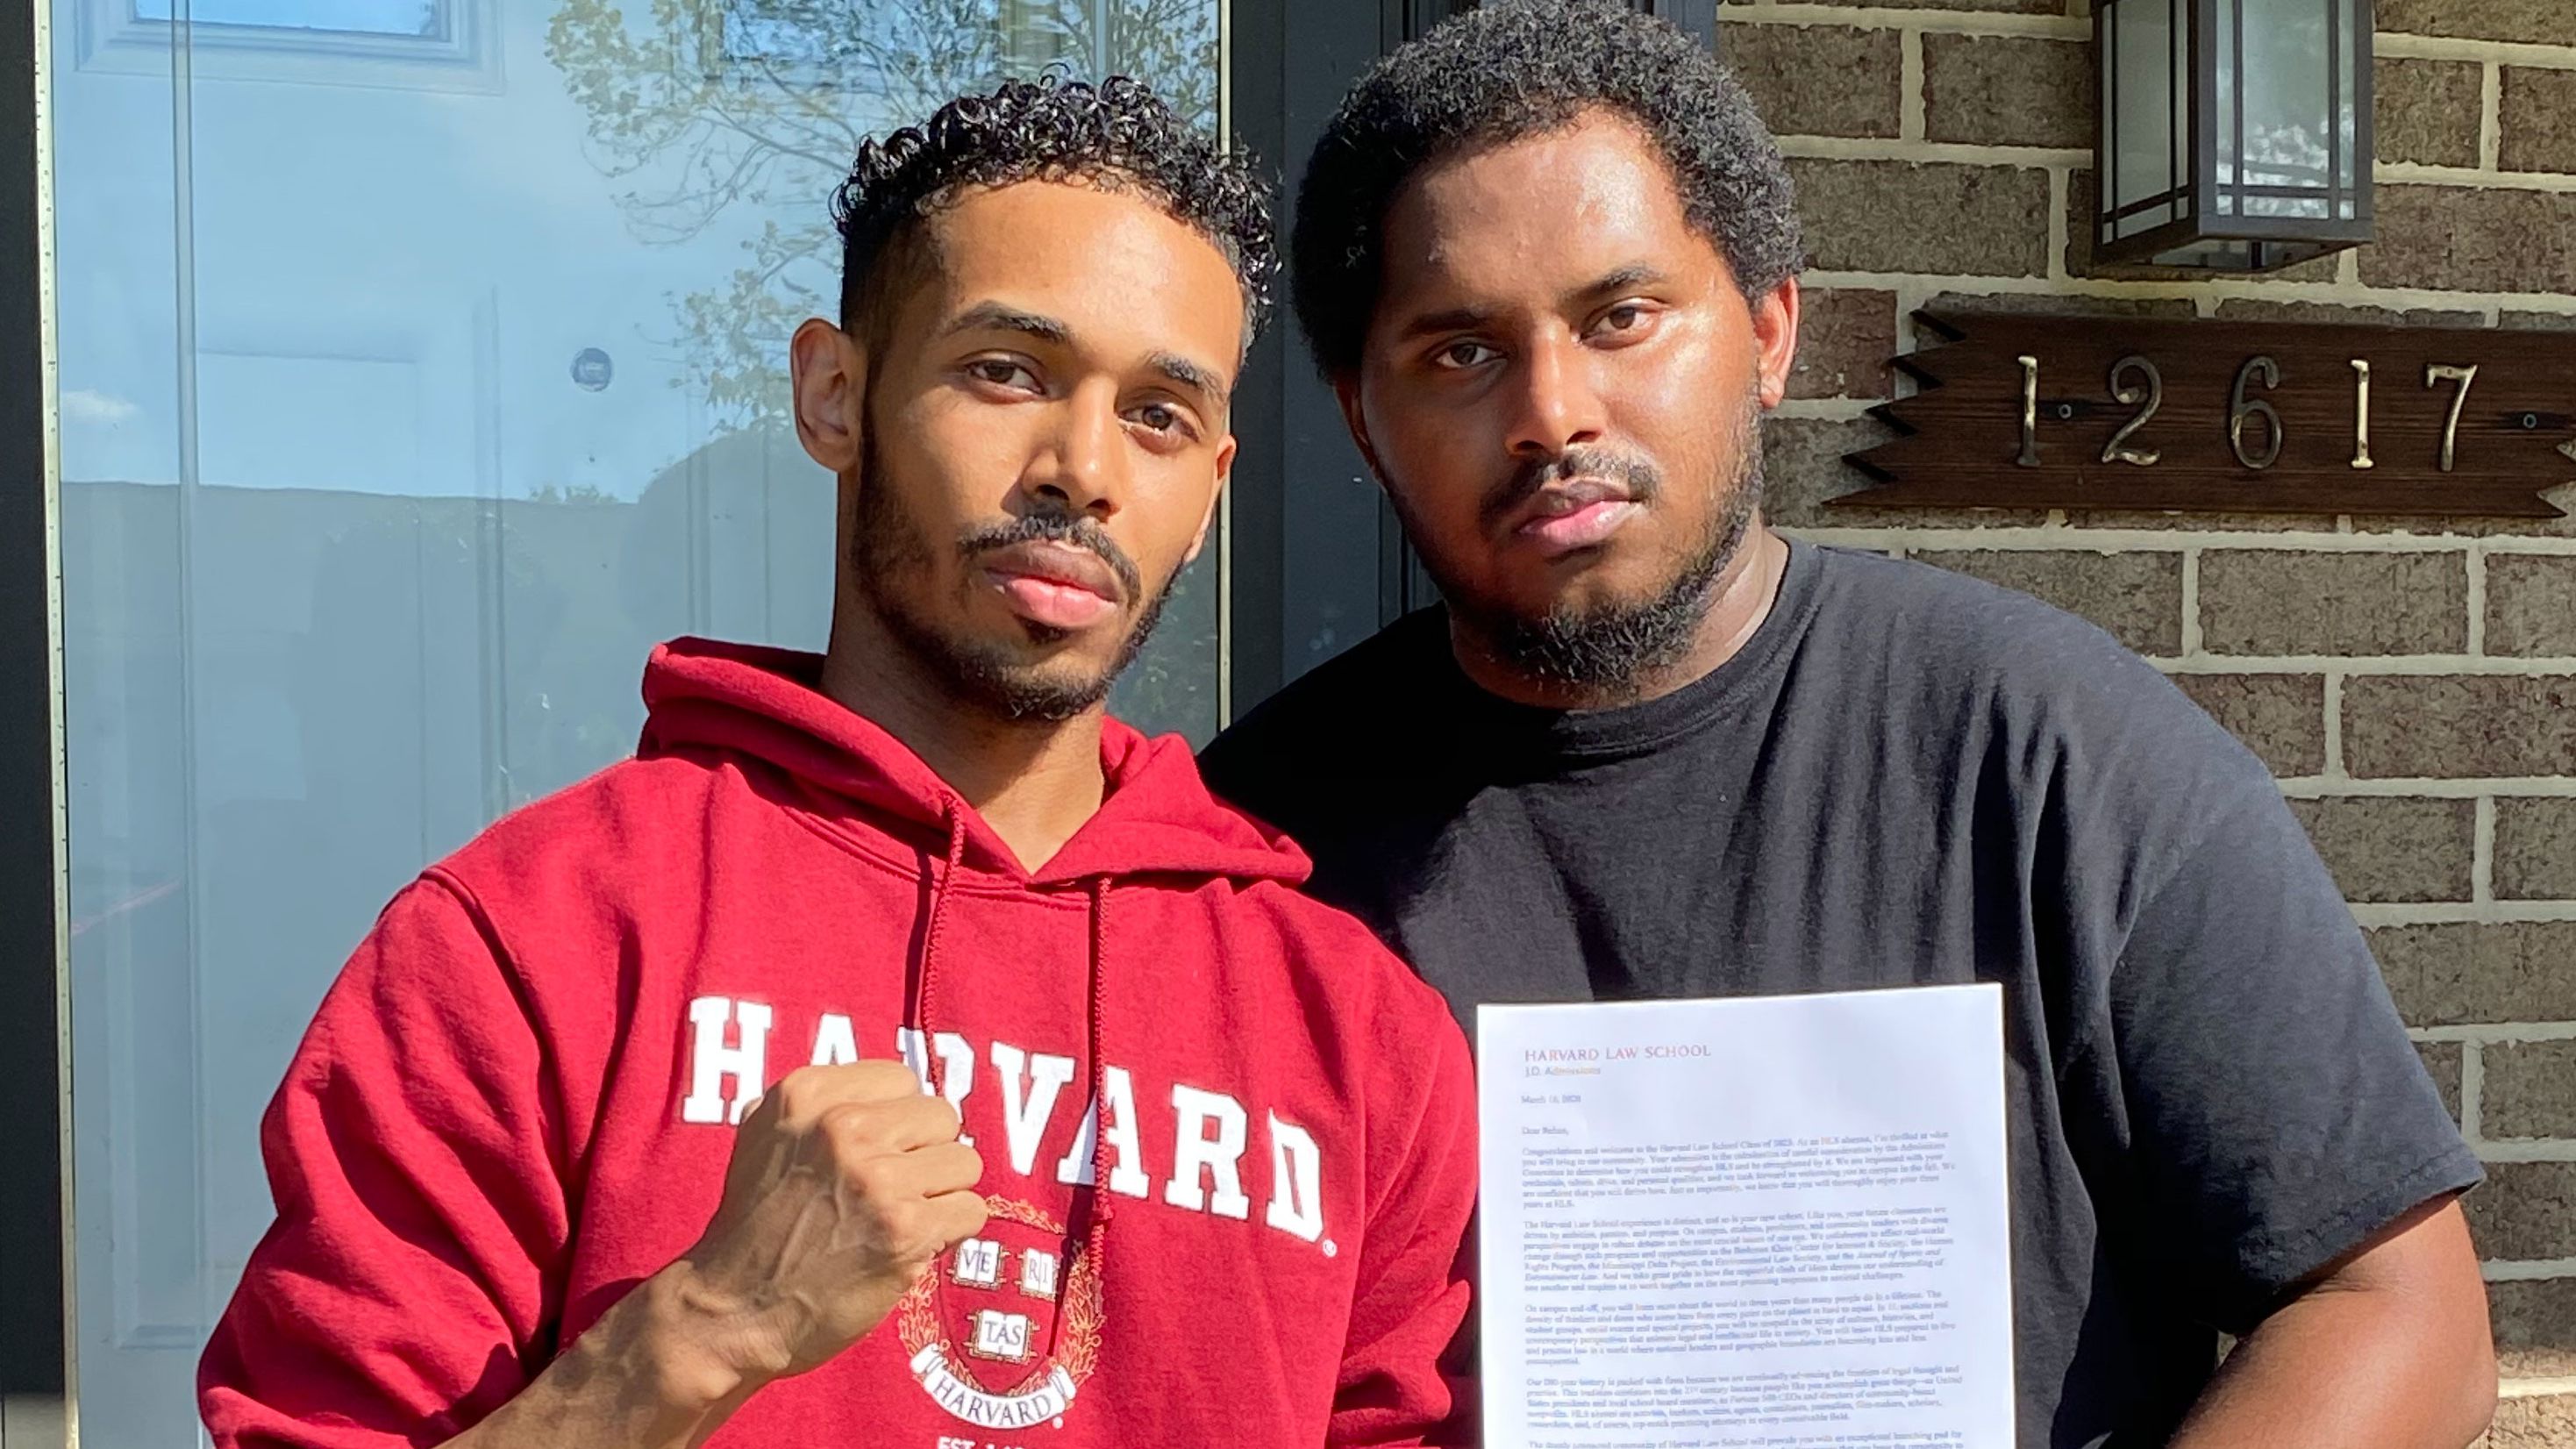 Rehan Staton, 24, with his brother Reggie Staton, 27, holding his acceptance letter to Harvard Law School. 